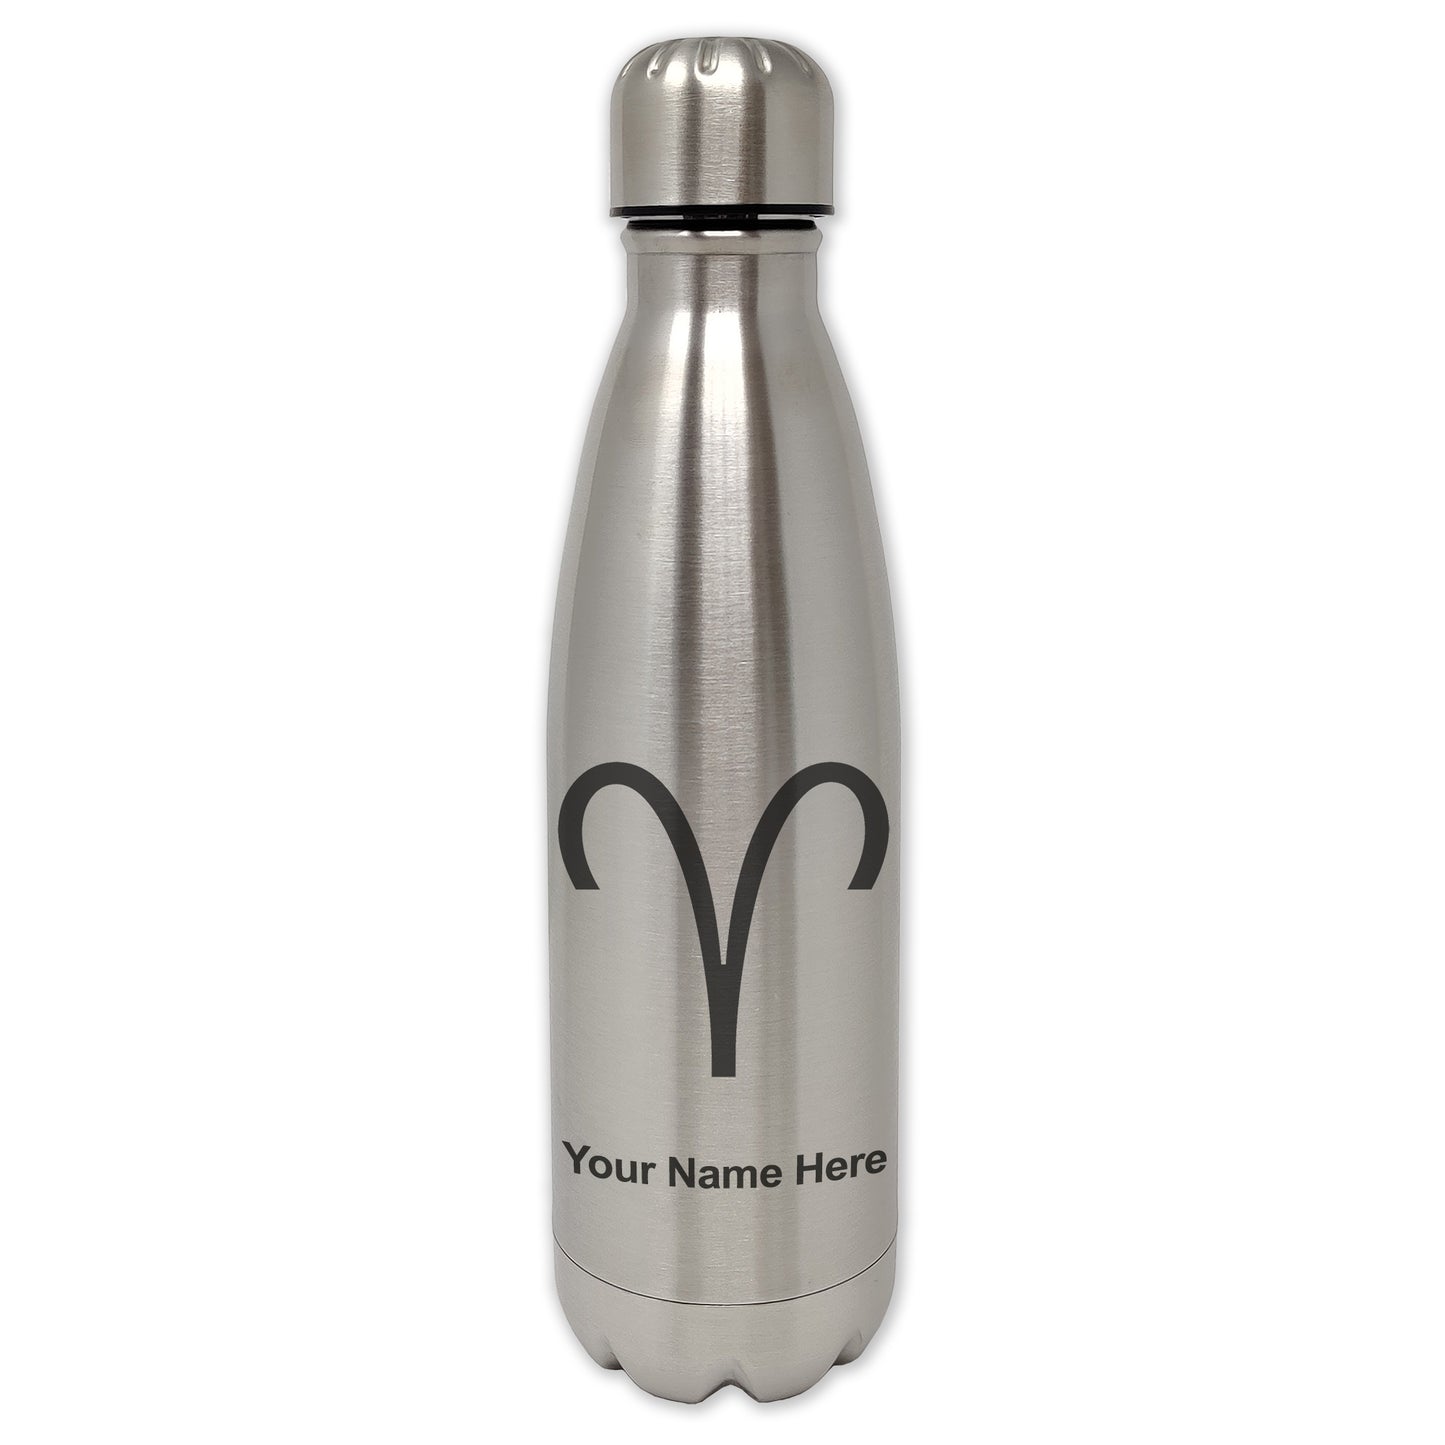 LaserGram Single Wall Water Bottle, Zodiac Sign Aries, Personalized Engraving Included